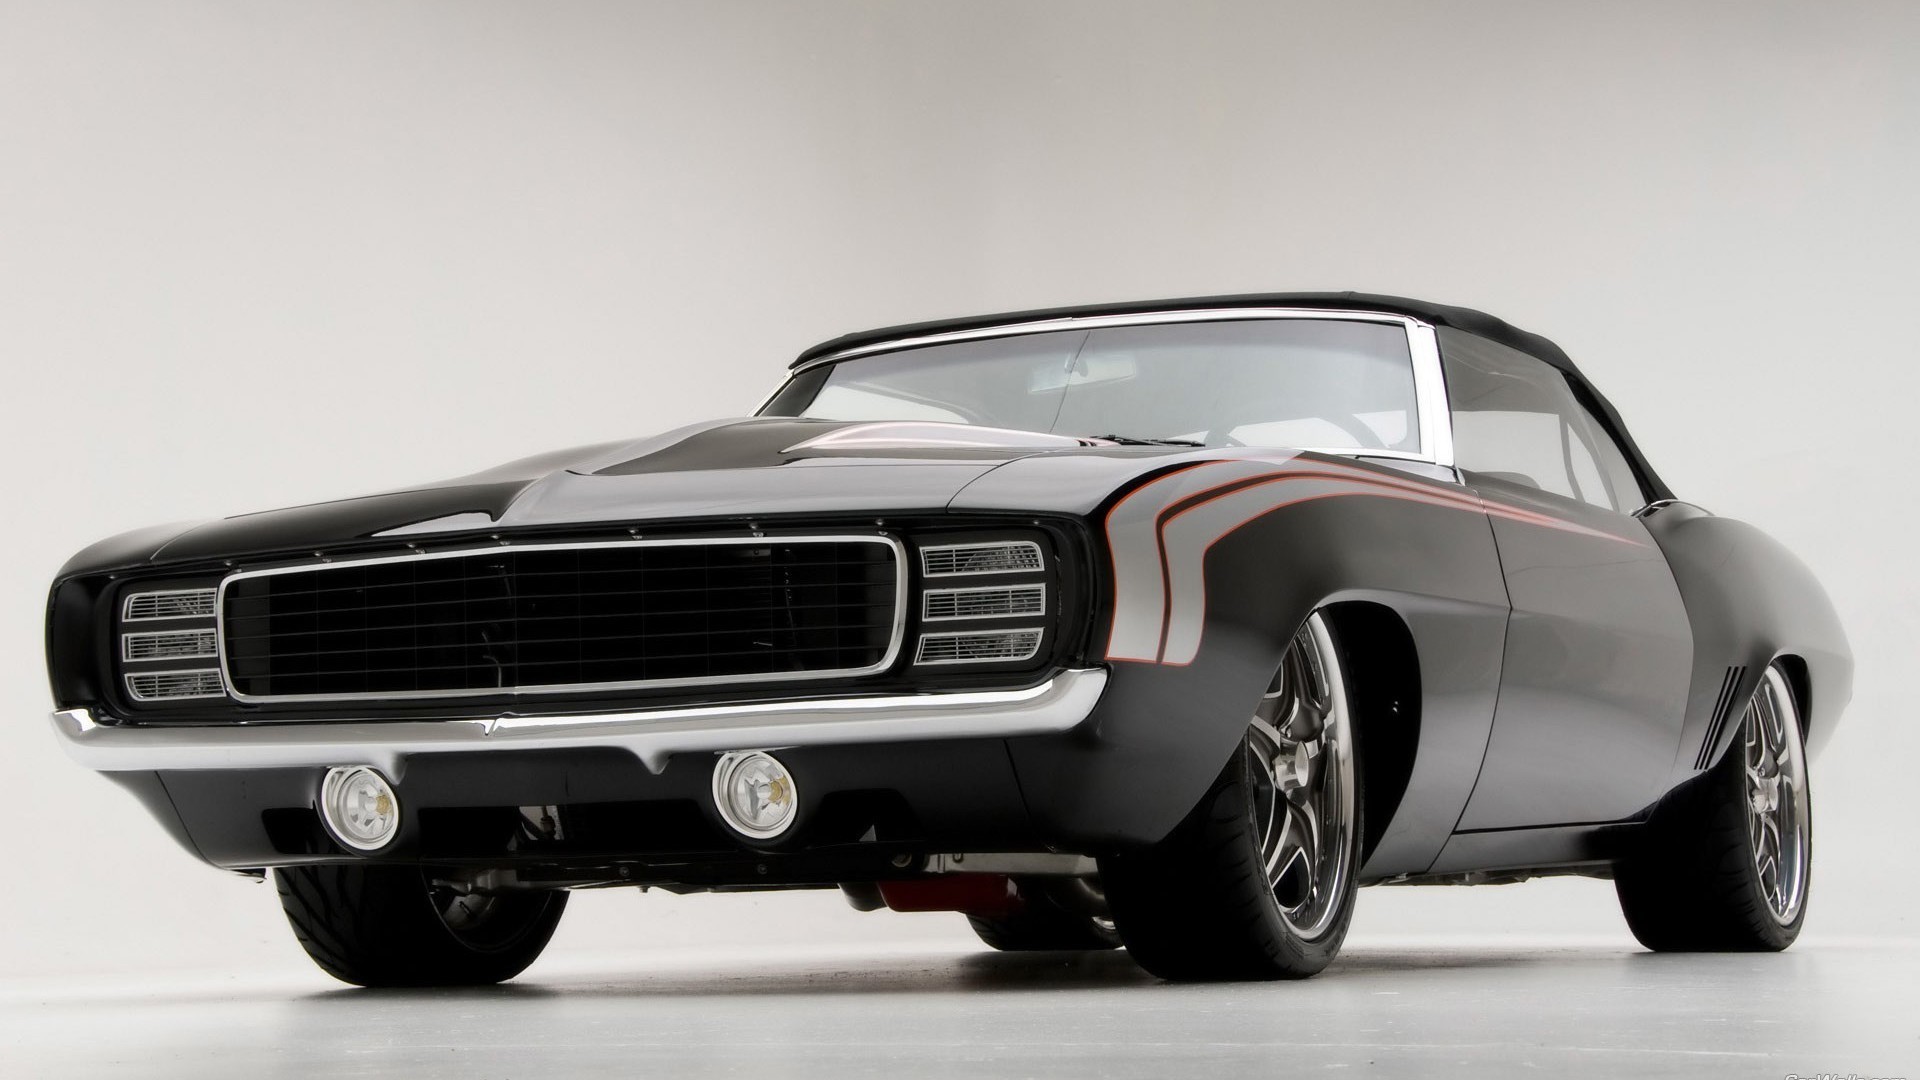 Muscle Cars in 1920x1080 Wallpapers (65+ images)
 Muscle Car Wallpaper 1920x1080